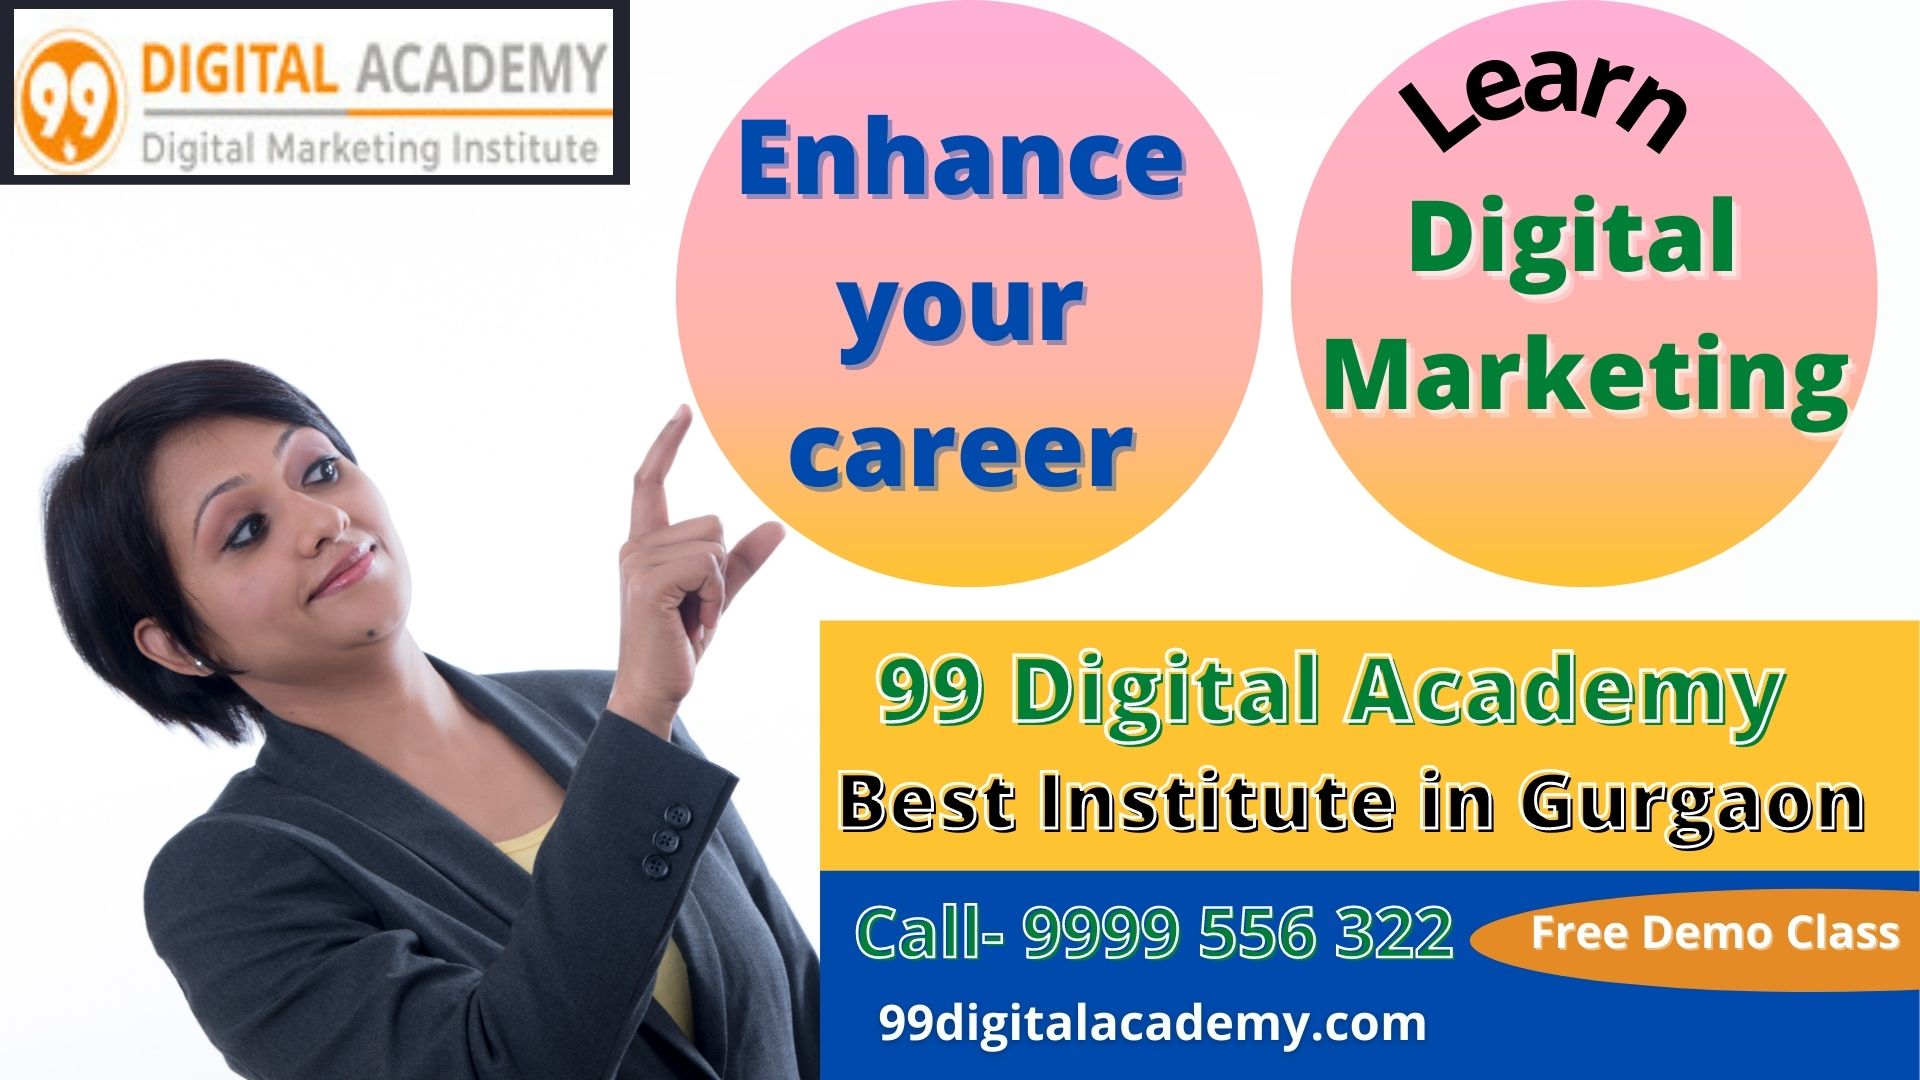 Become Certified in Digital Marketing, Learn from expert.Education and LearningProfessional CoursesWest DelhiJanak Puri